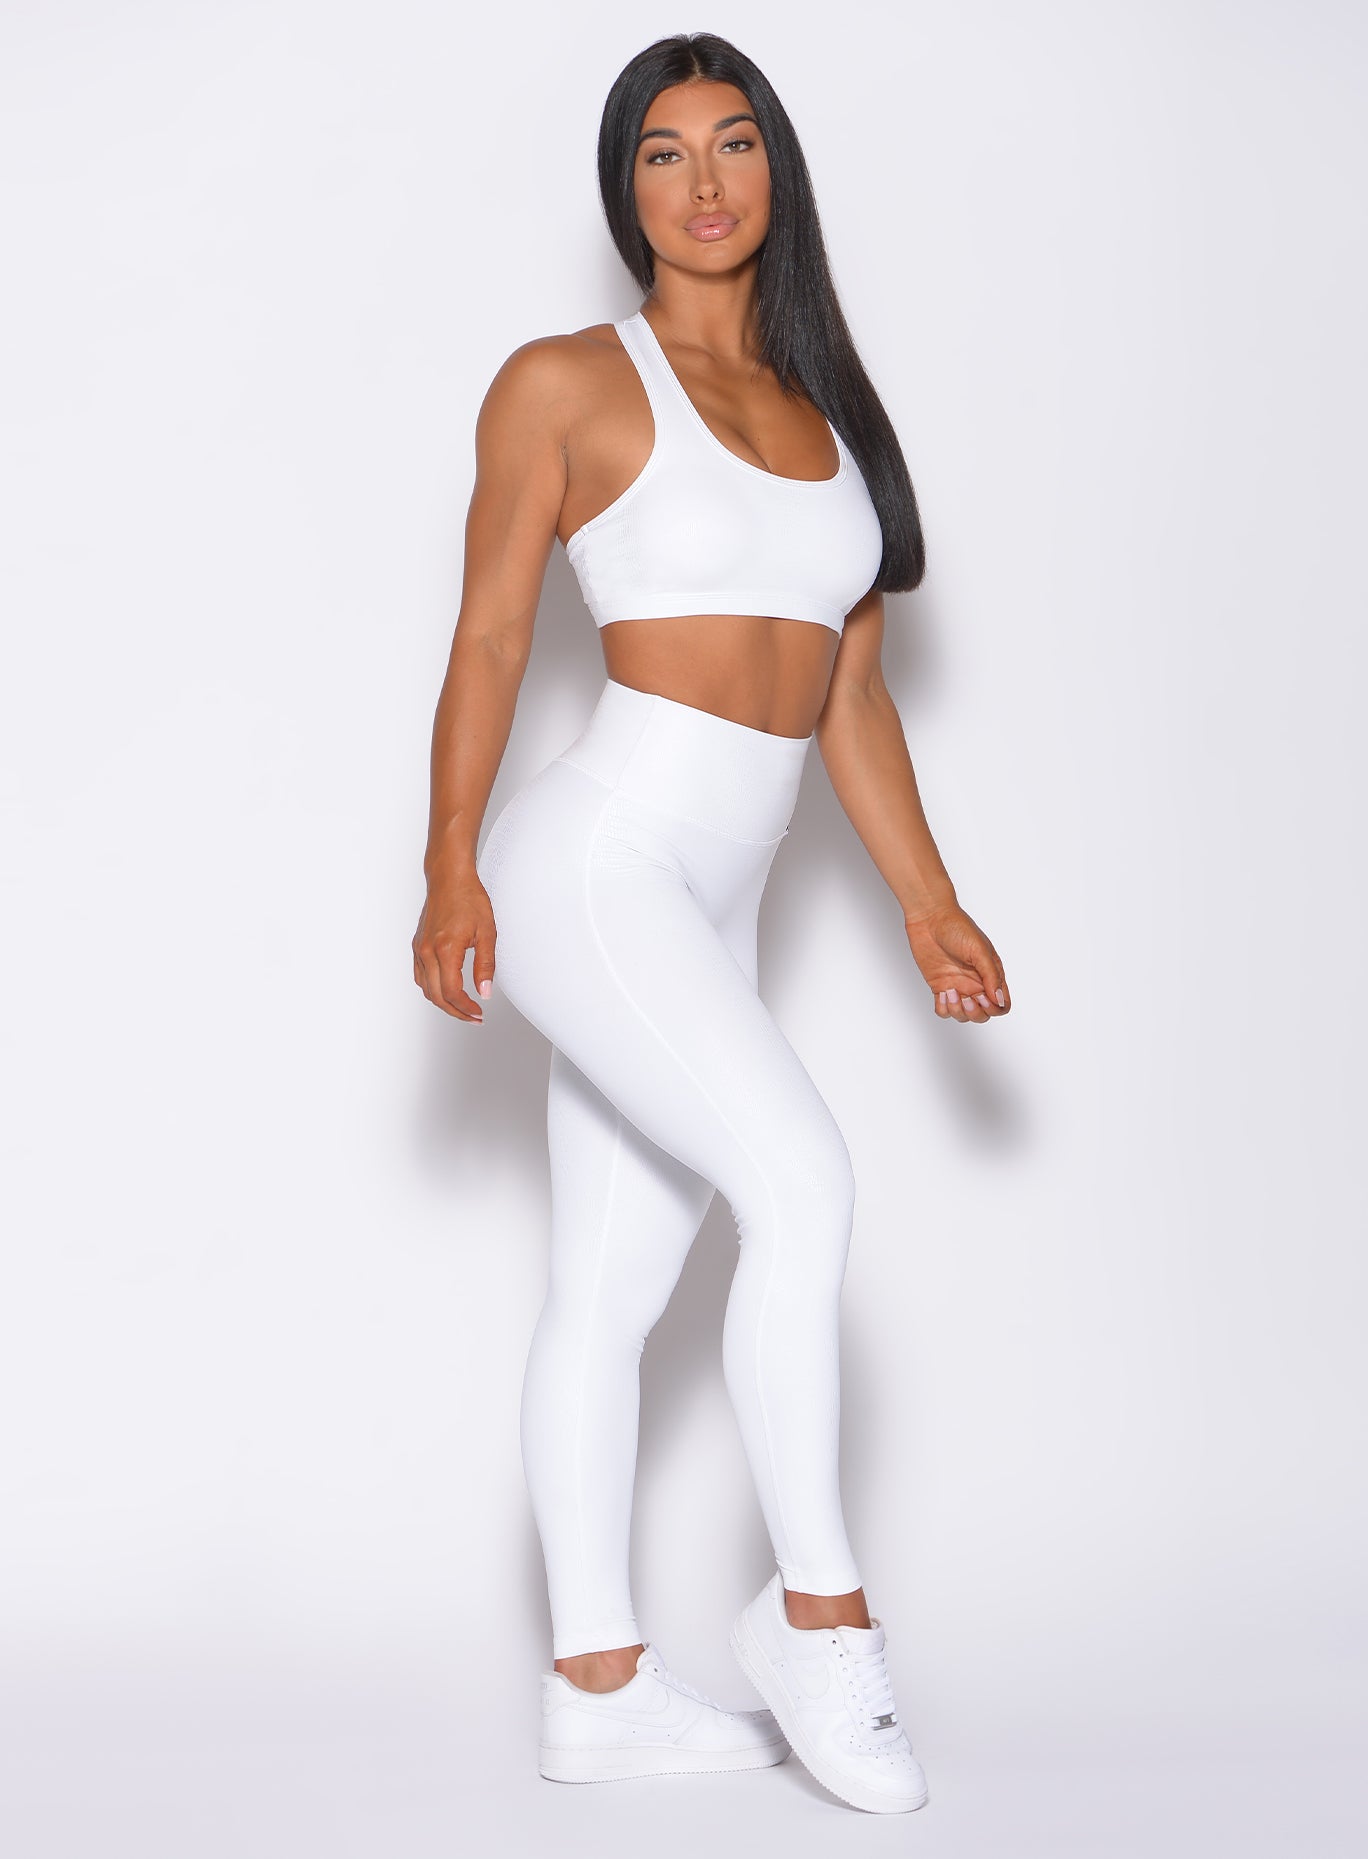 Right side profile view of a model angled right wearing our shine leggings in white python color and a matching bra